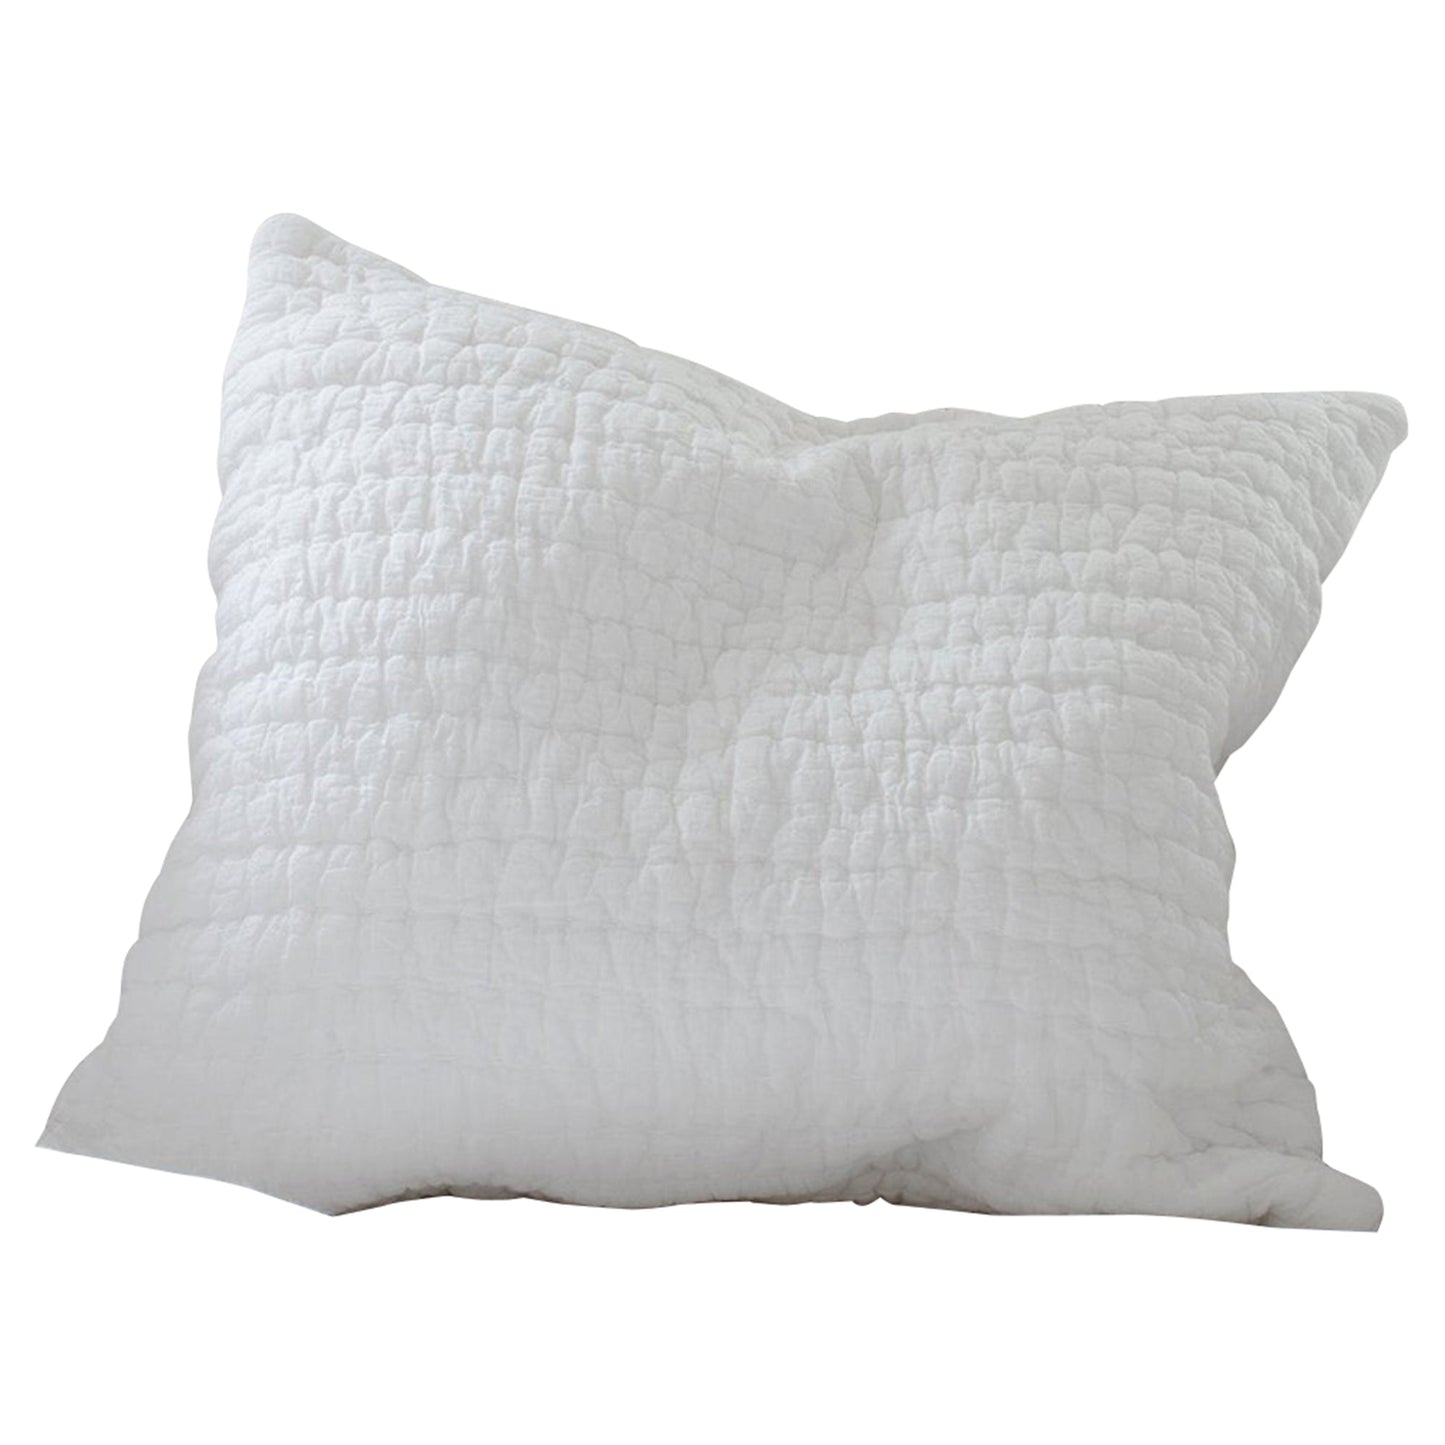 Hand-Stitched Pillowcase / Cushion Cover, Organic 100% Cotton (Square, 2 Sizes) - White - White & Faded